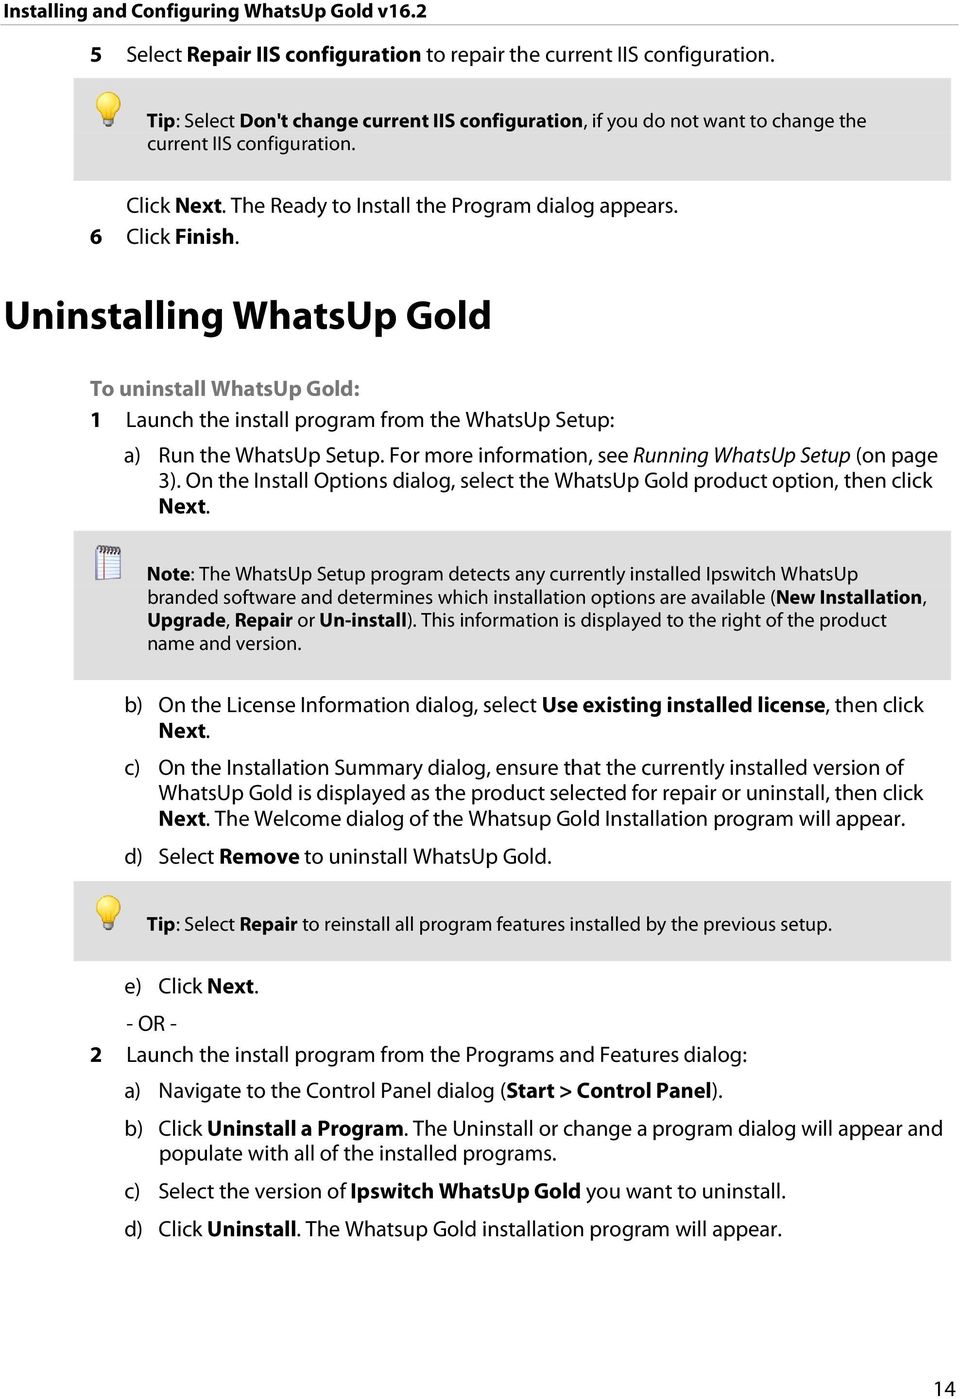 For more information, see Running WhatsUp Setup (on page 3). On the Install Options dialog, select the WhatsUp Gold product option, then click Next.